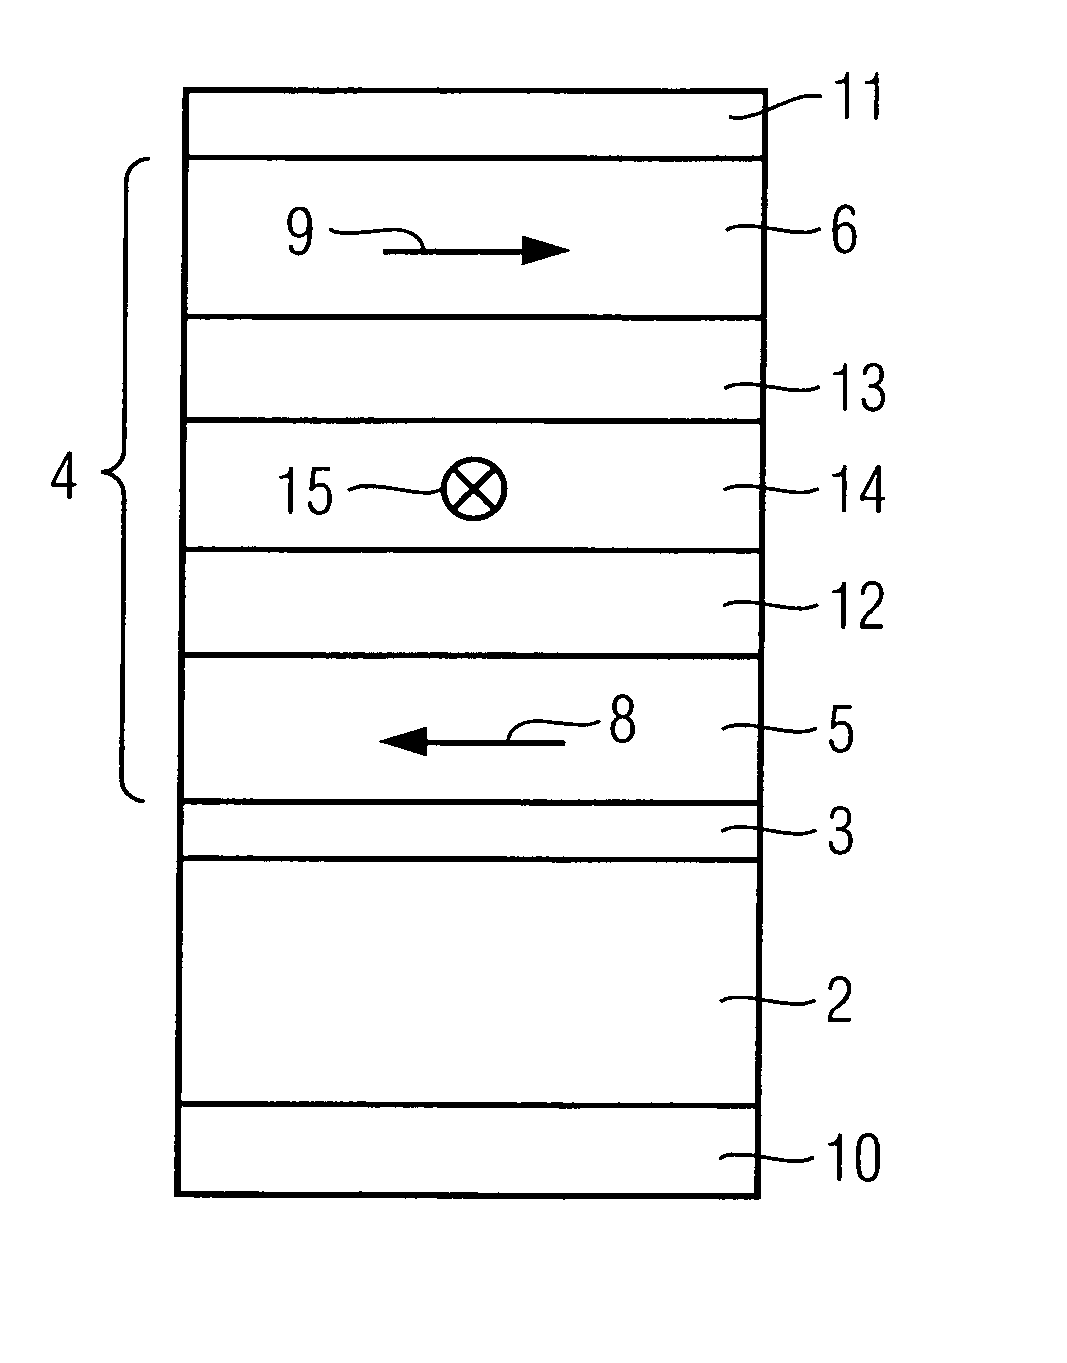 Adiabatic rotational switching memory element including a ferromagnetic decoupling layer